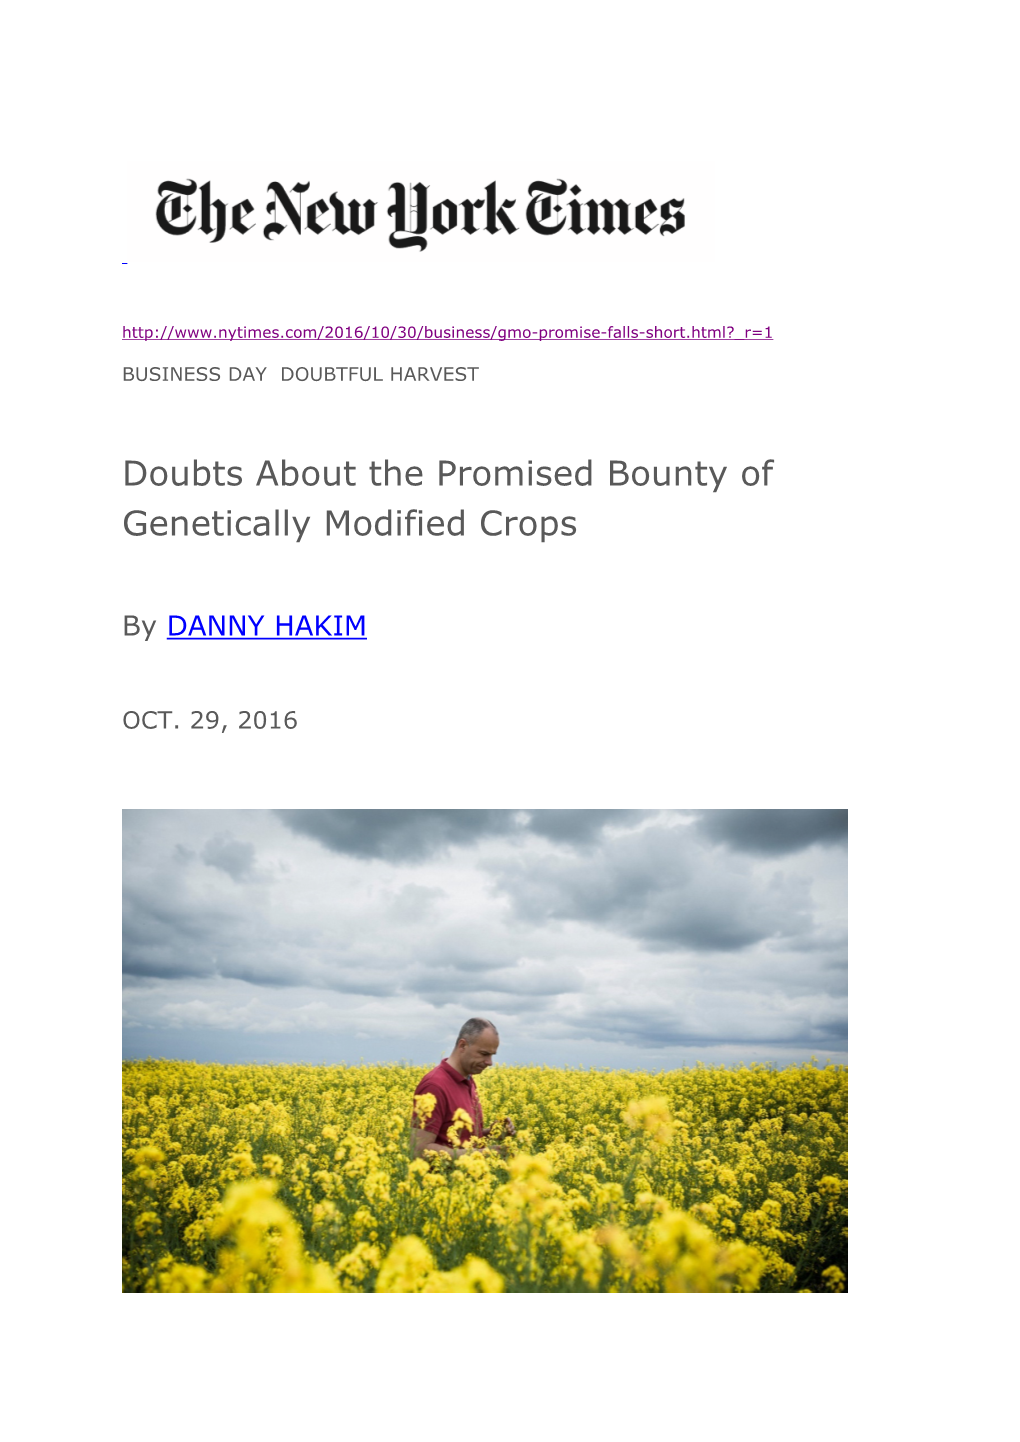 Doubts About the Promised Bounty of Genetically Modified Crops